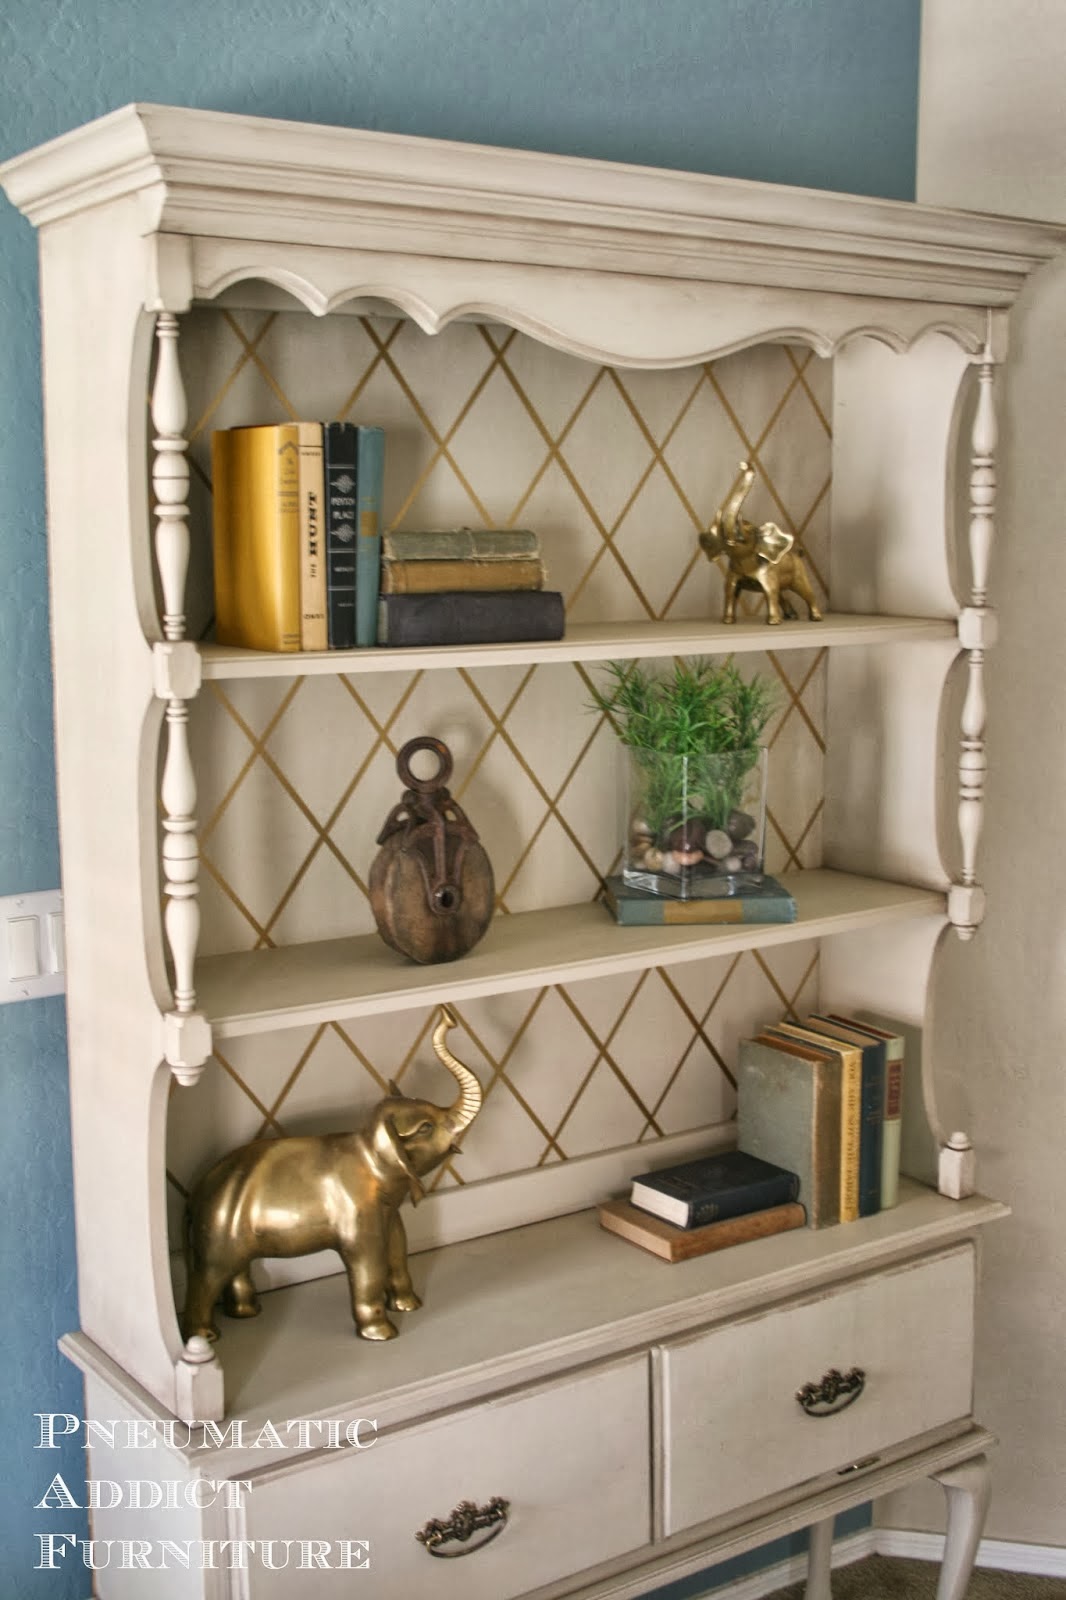 http://pneumaticaddict.blogspot.com/2014/03/what-to-do-with-old-dresser-hutch.html